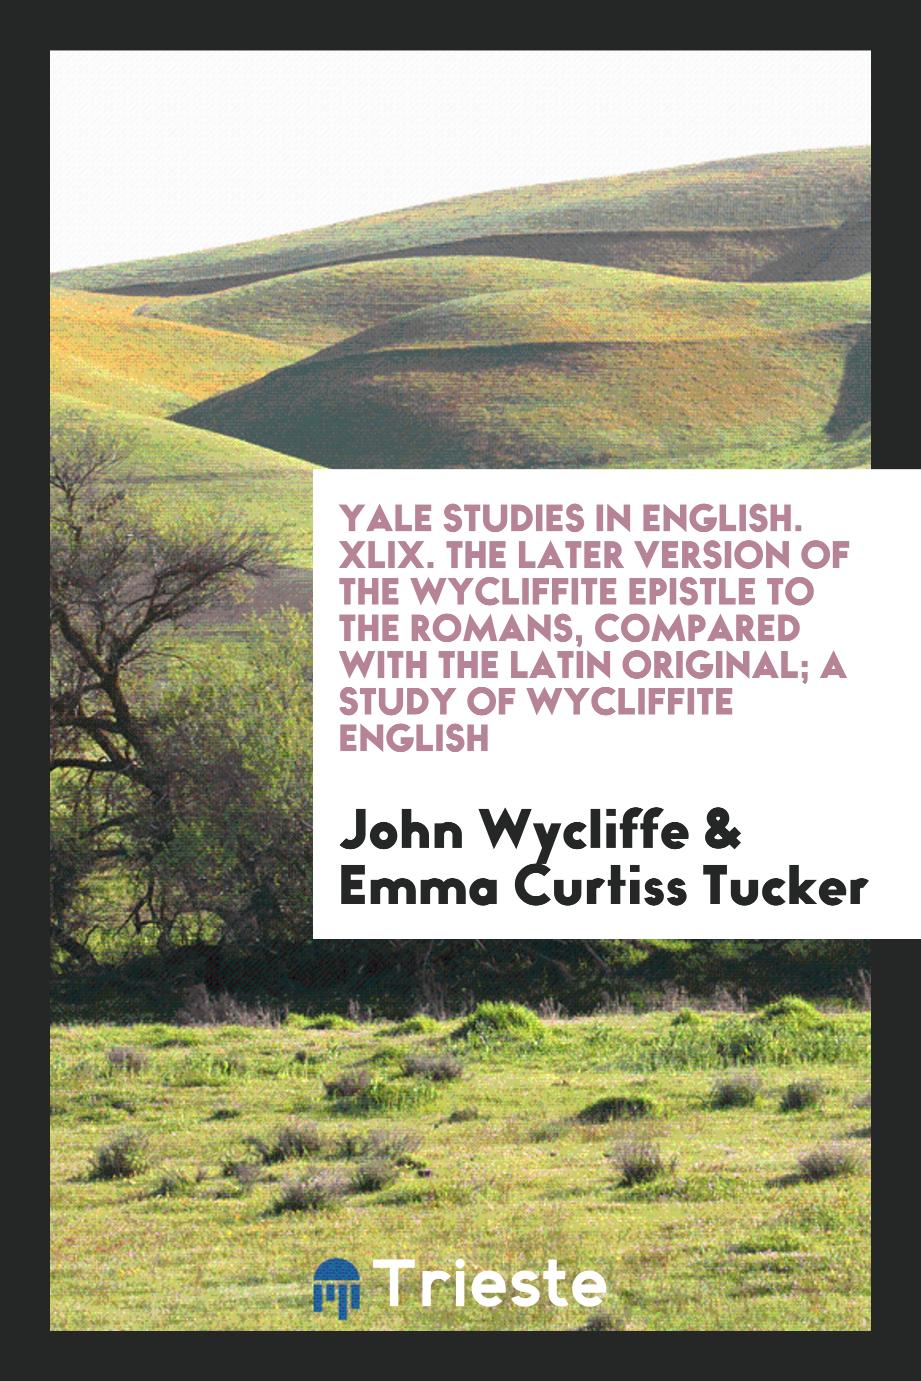 Yale studies in English. XLIX. The later version of the Wycliffite Epistle to the Romans, compared with the Latin original; a study of Wycliffite English